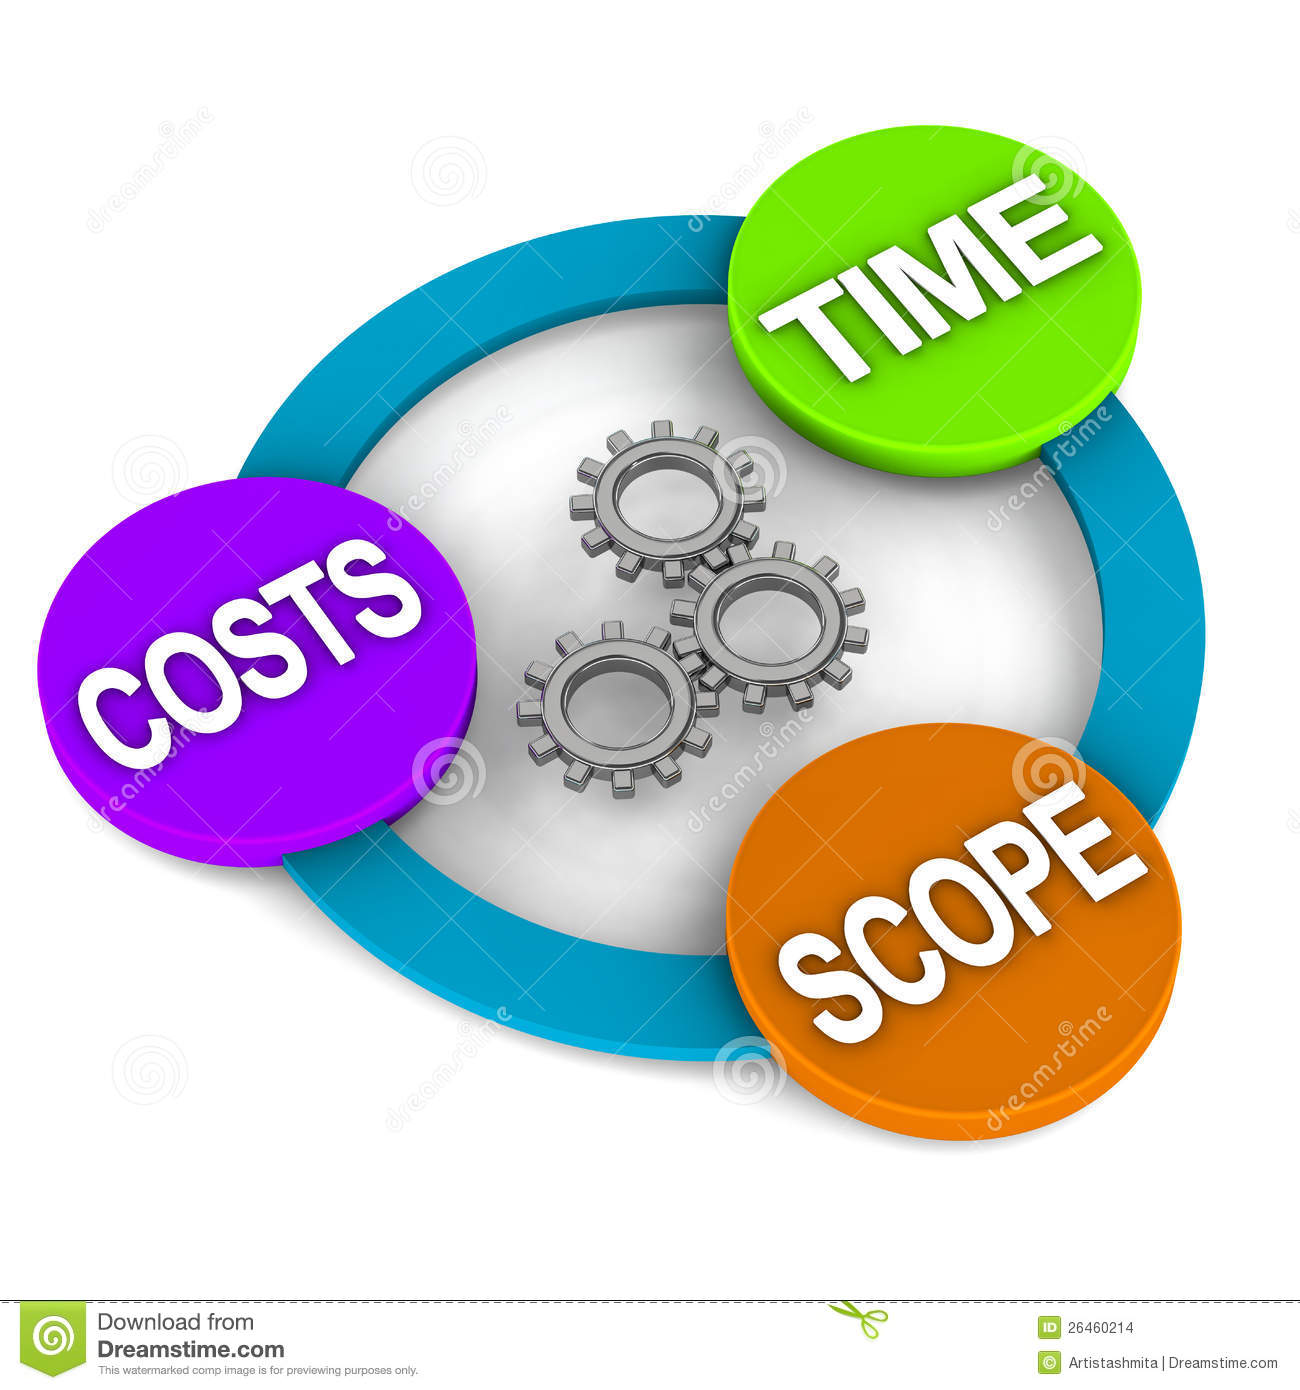 Elements Or Concept Of Project Management Time Scope And Costs